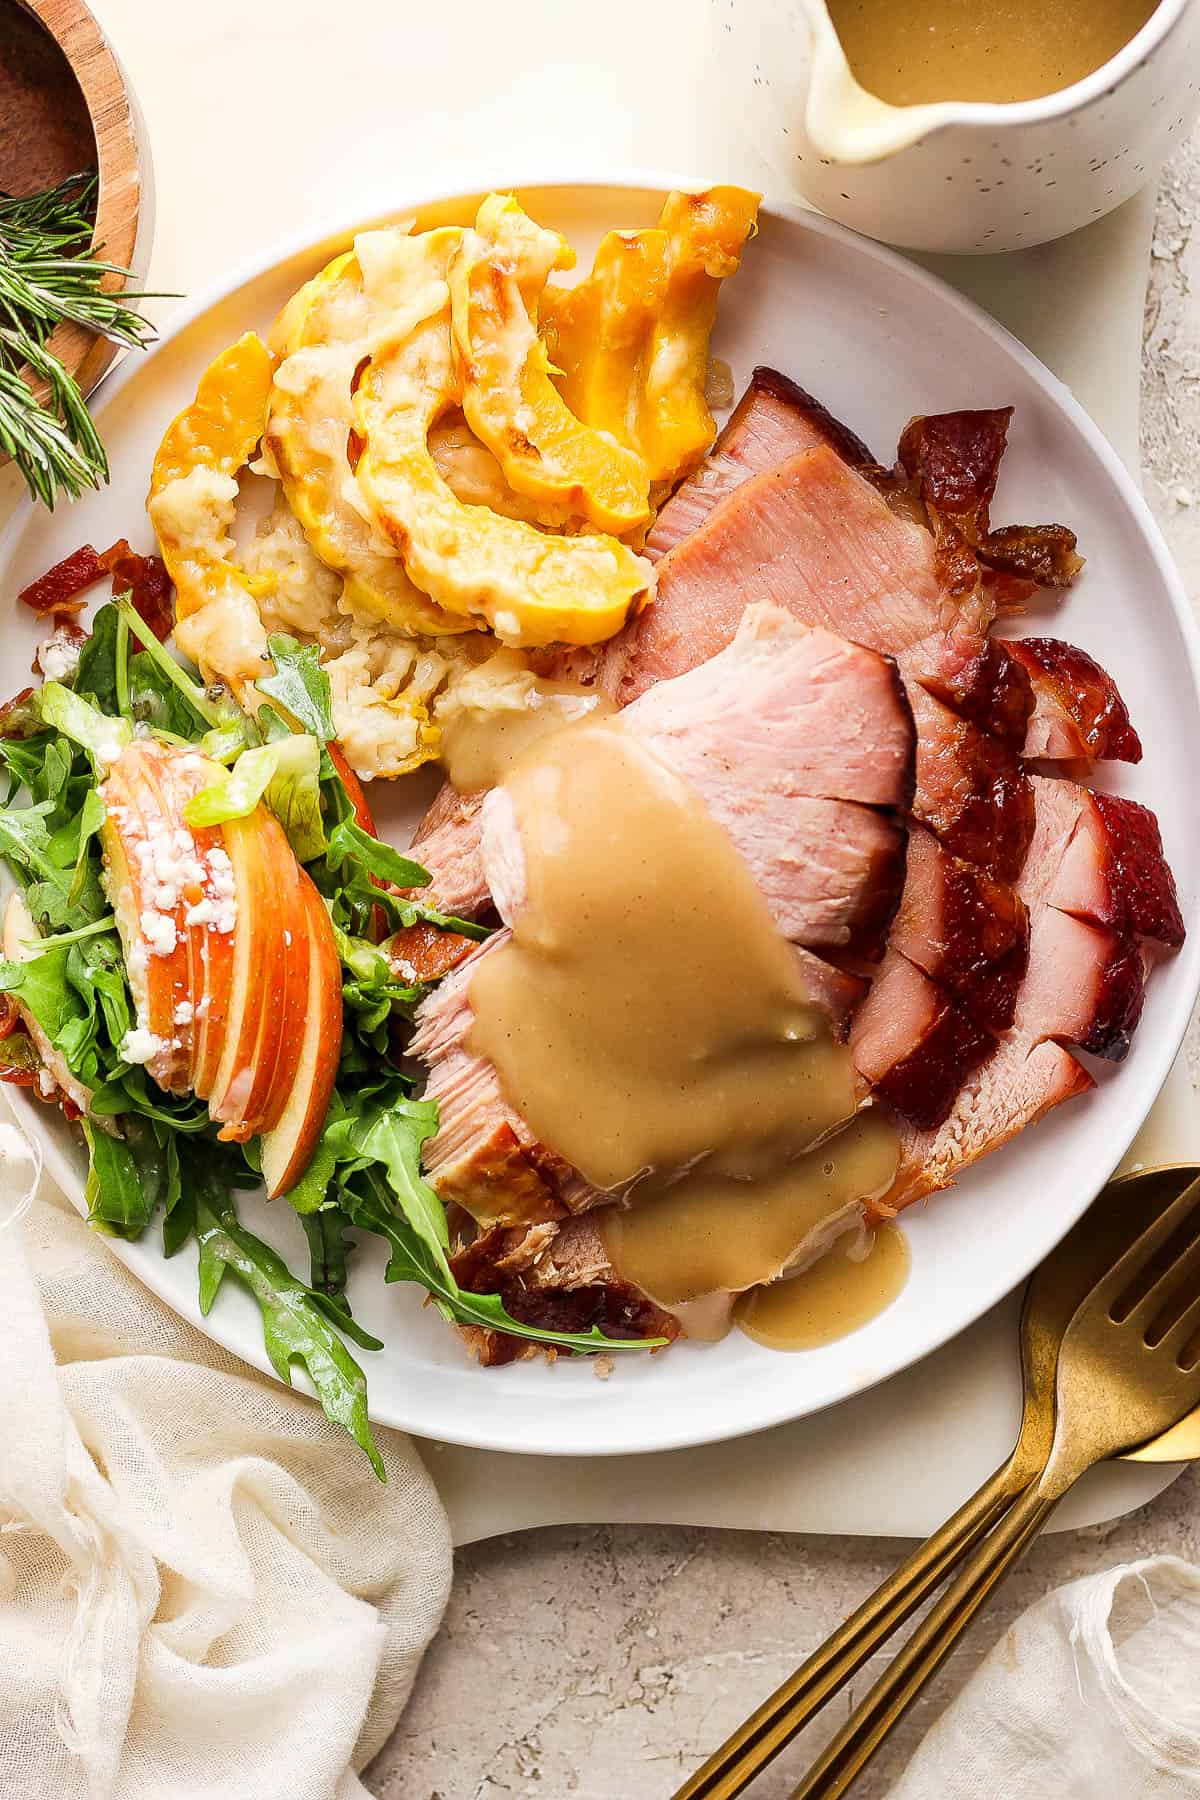 A full plate of ham and sides with gravy poured over the ham.